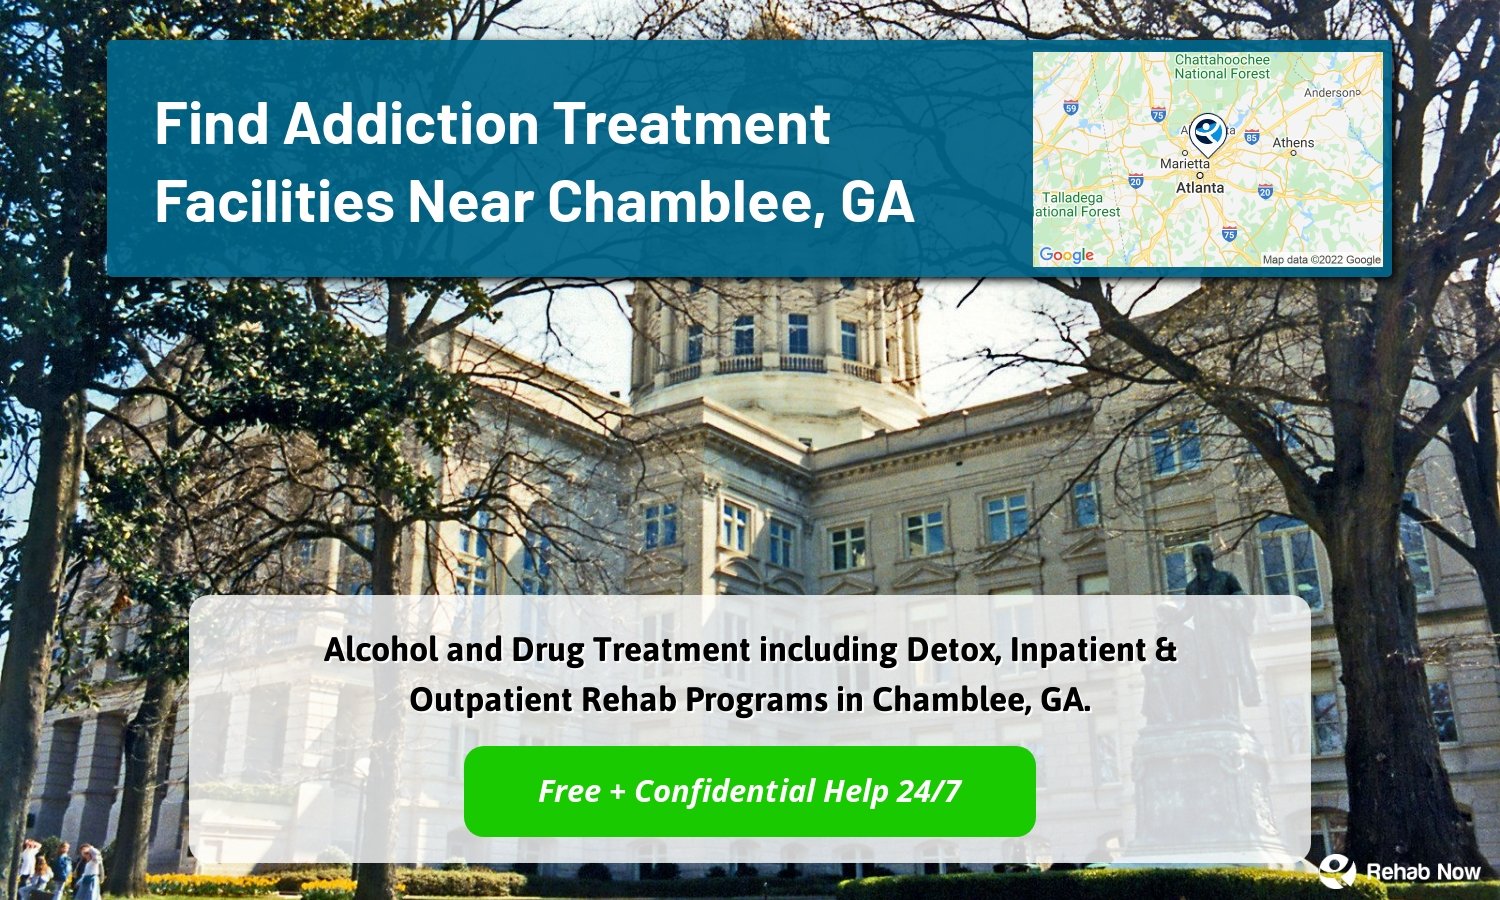 Alcohol and Drug Treatment including Detox, Inpatient & Outpatient Rehab Programs in Chamblee, GA.